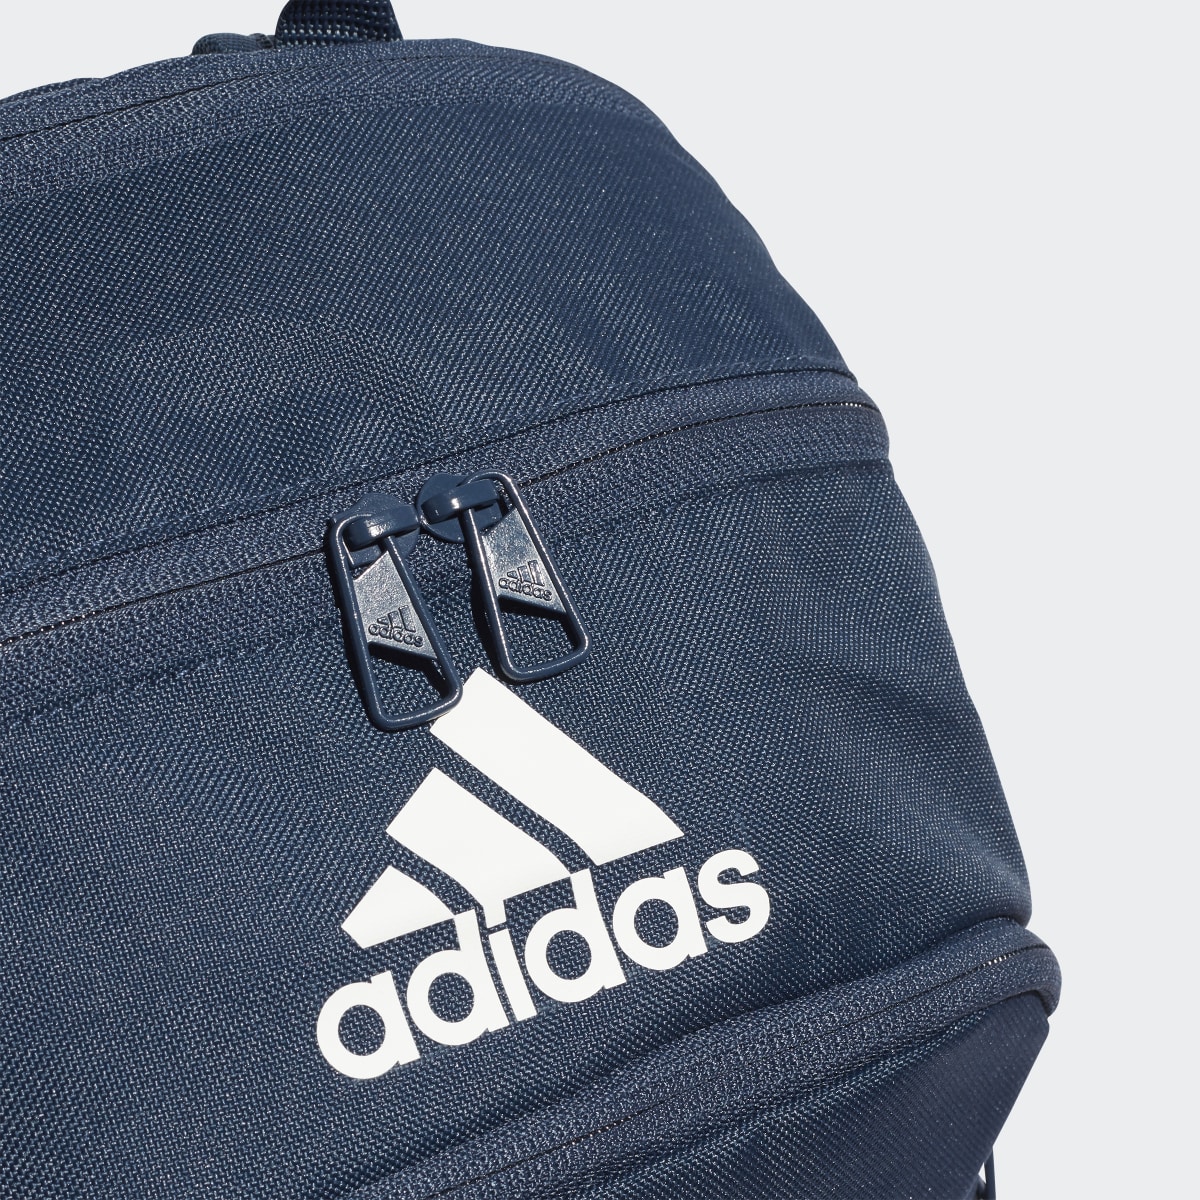 Adidas Power 5 Backpack. 7